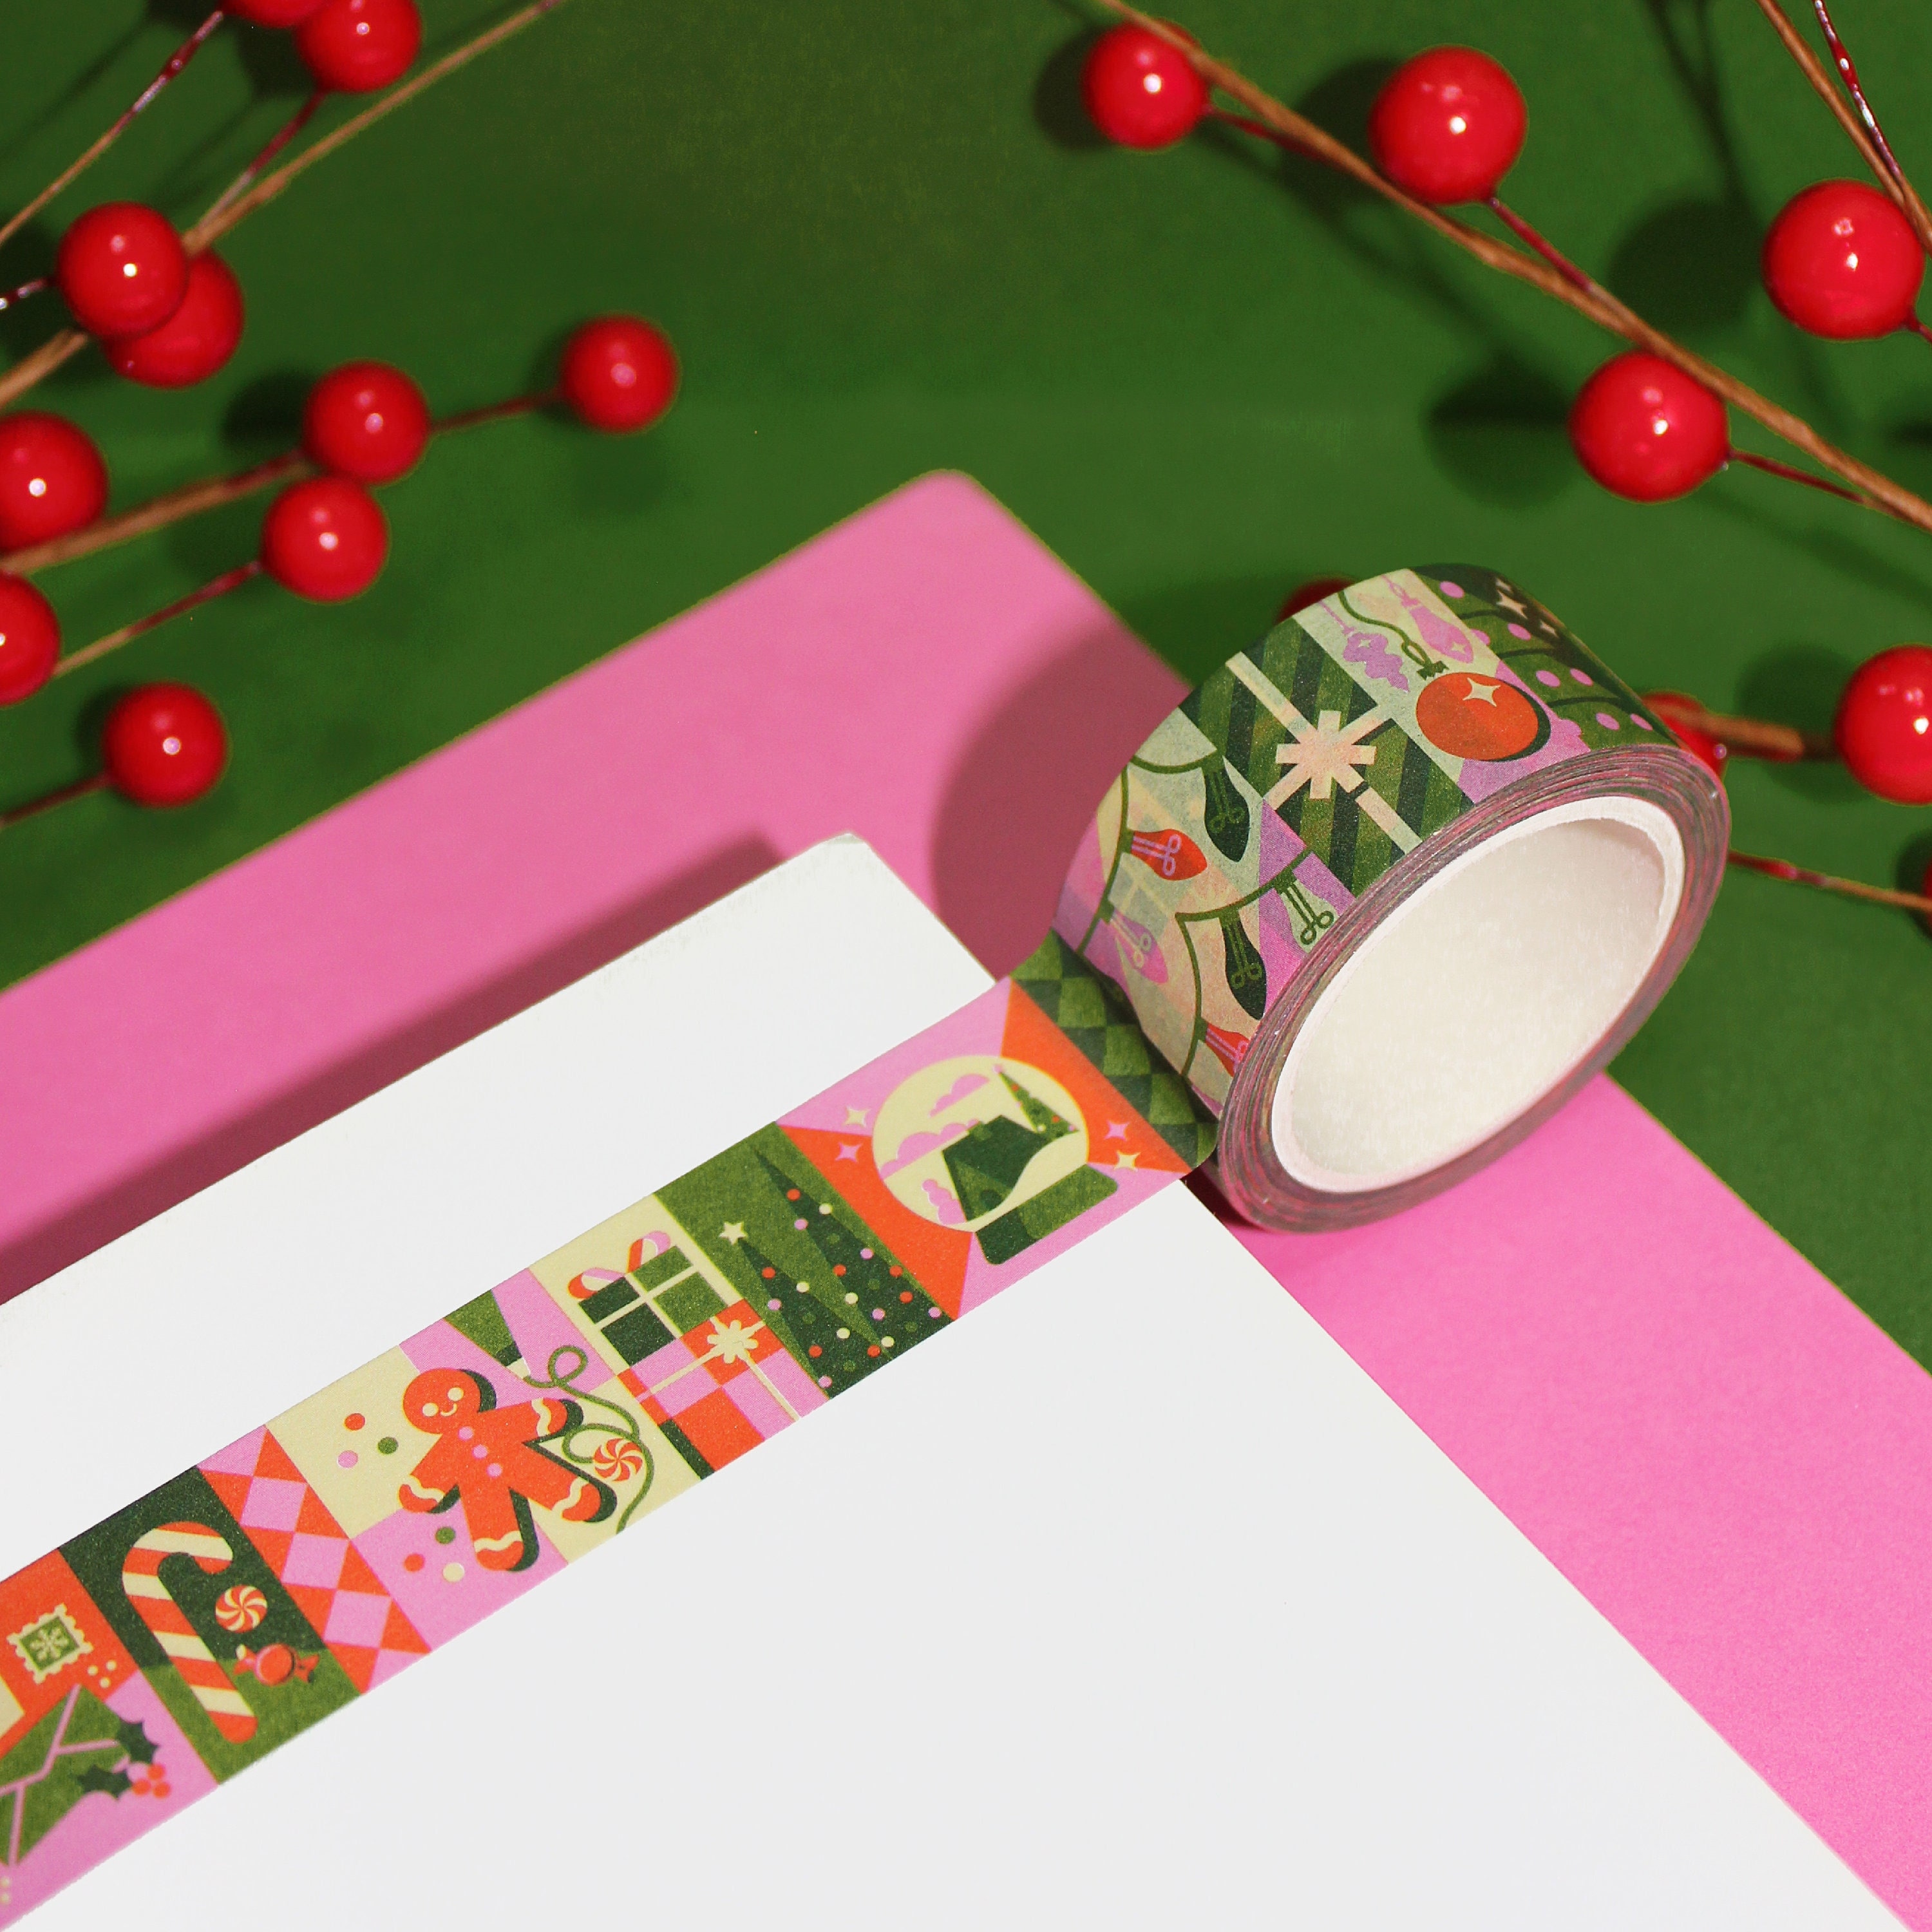 JOLLY HOLIDAY Festive Christmas Washi Tape 20mm/10m Holiday Paper